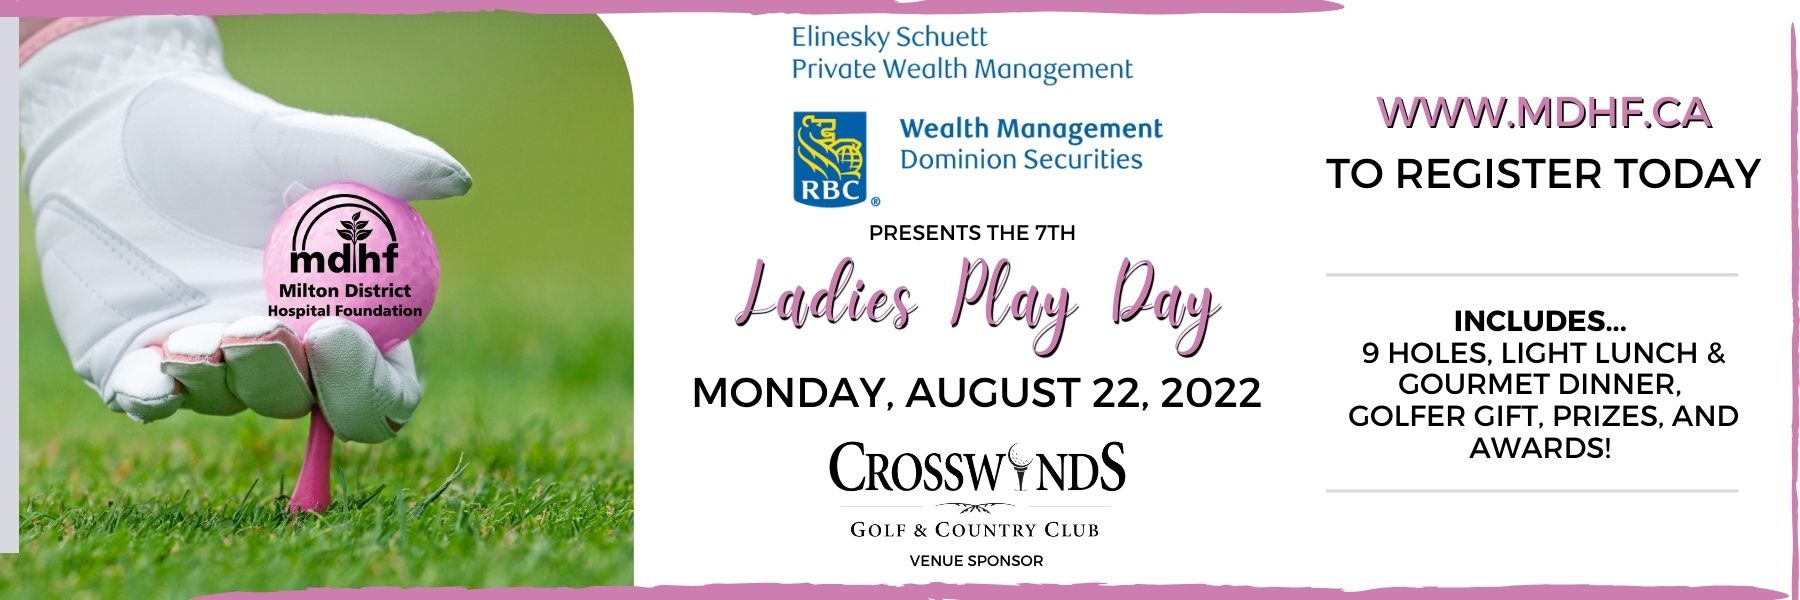 Ladies Play Day promotional poster